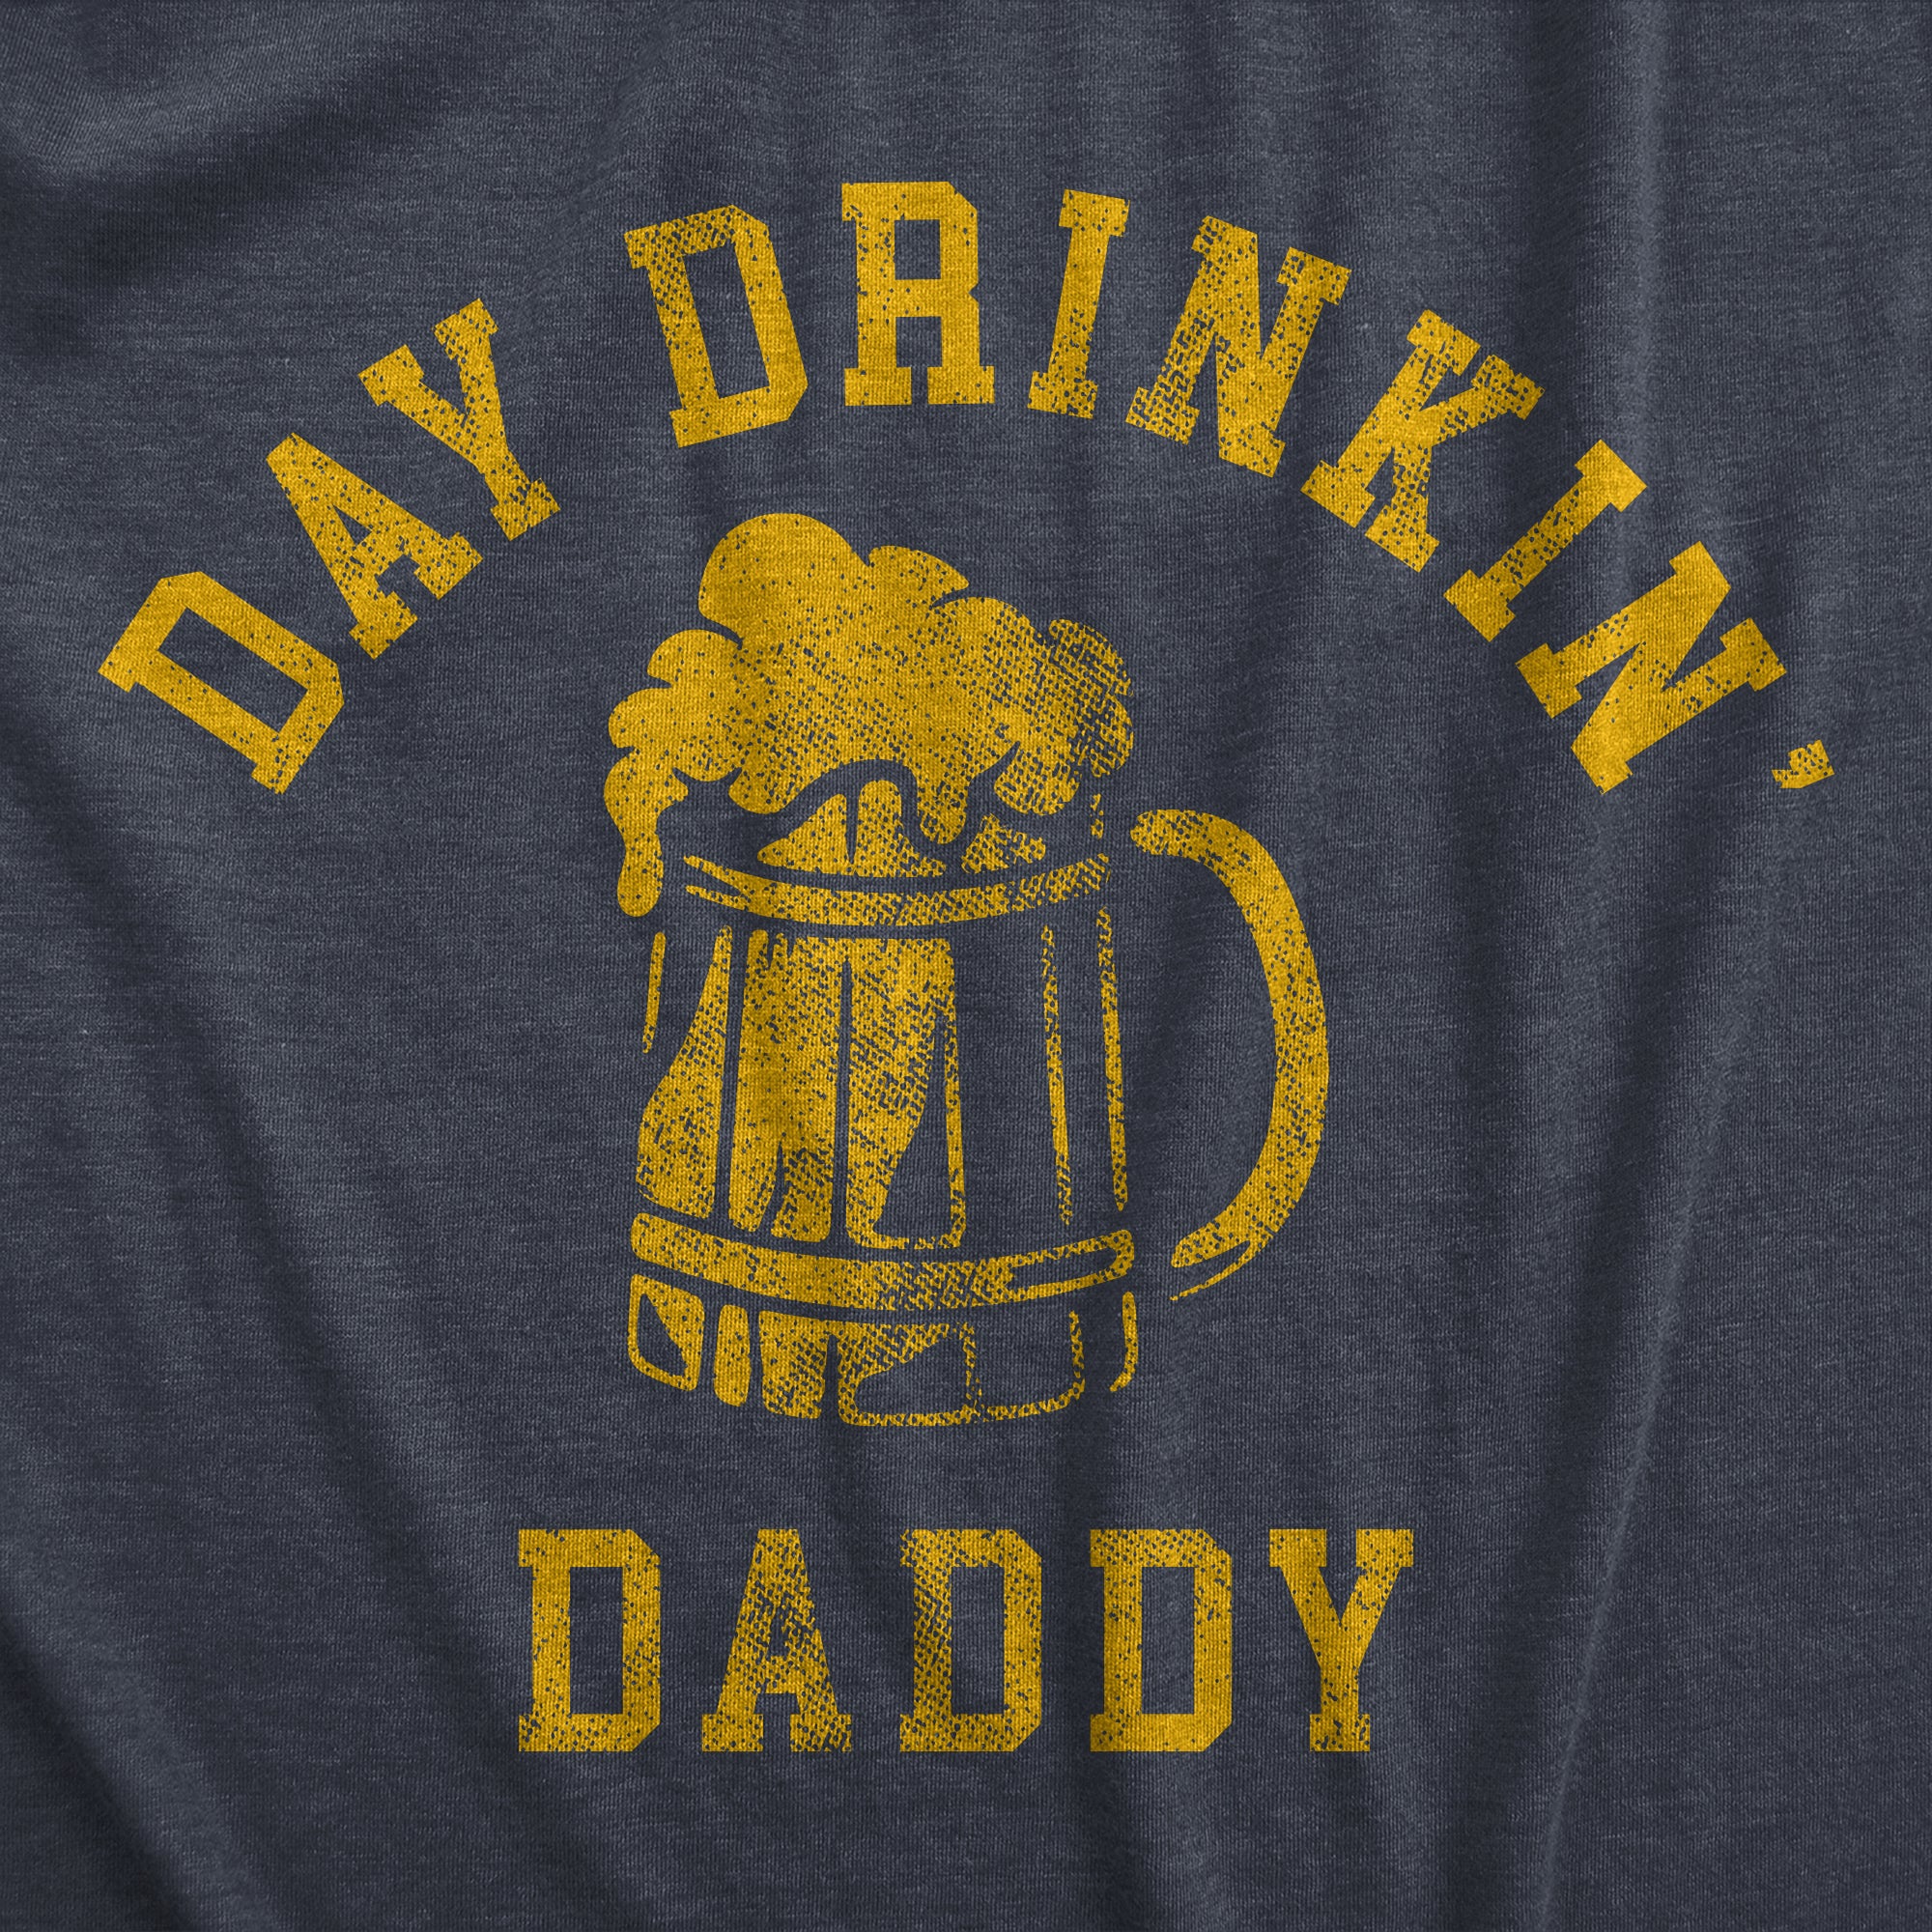 Funny Heather Navy - DADDY Day Drinkin Daddy Mens T Shirt Nerdy Father's Day Drinking Beer Tee